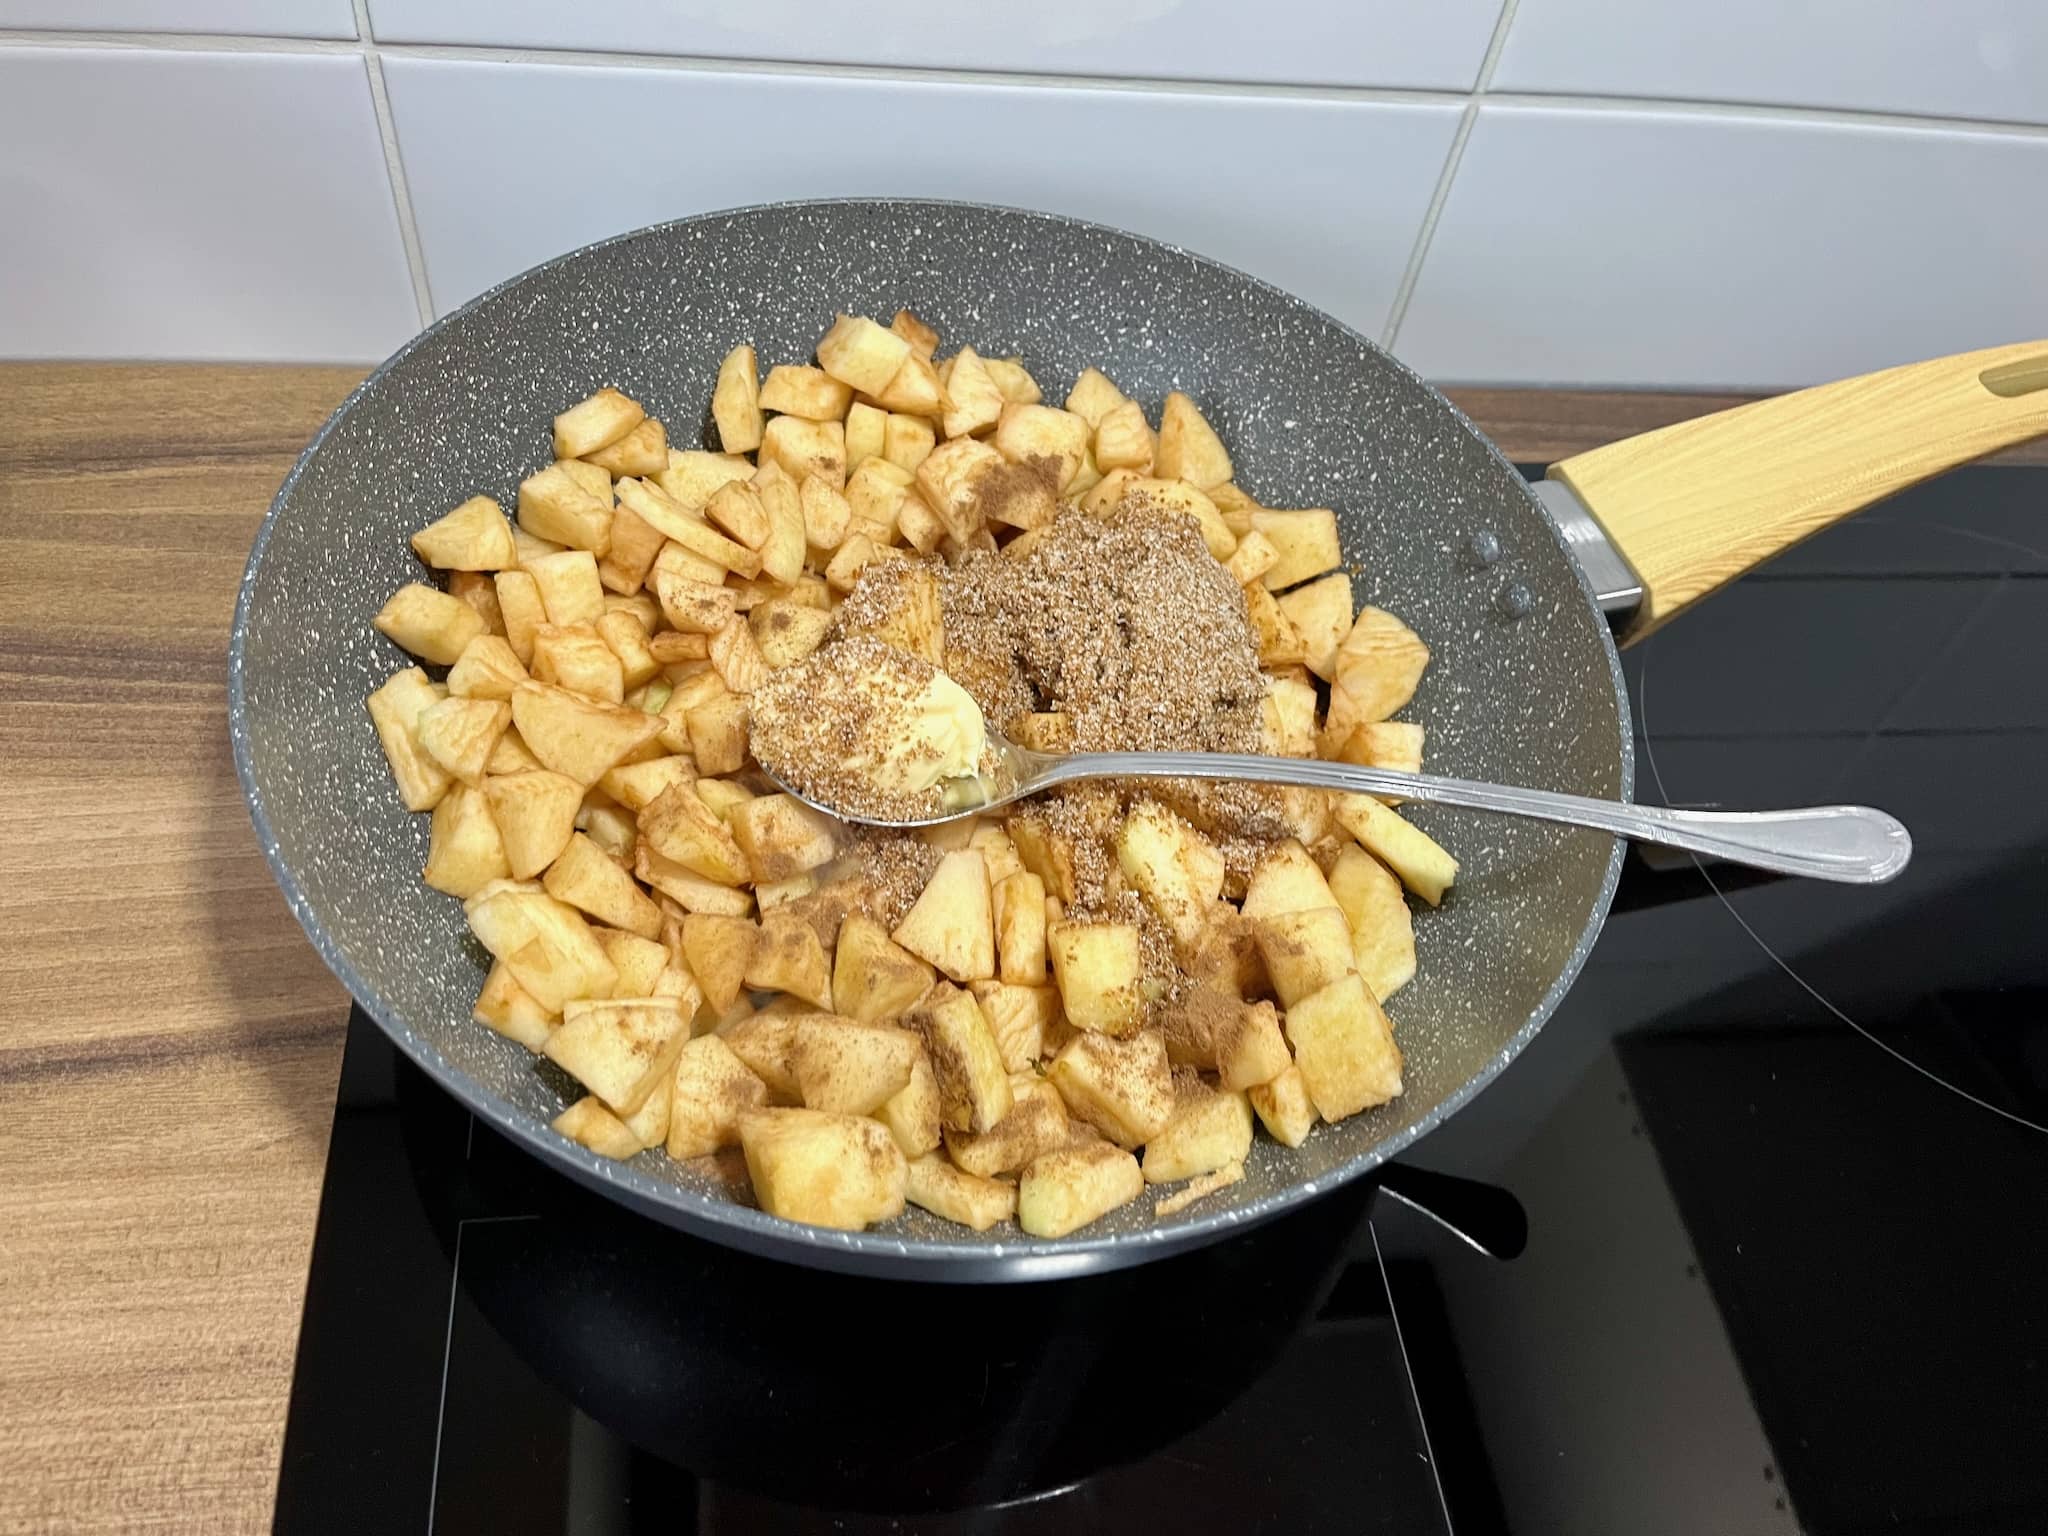 Apples in a frying pan with spices and butter on top